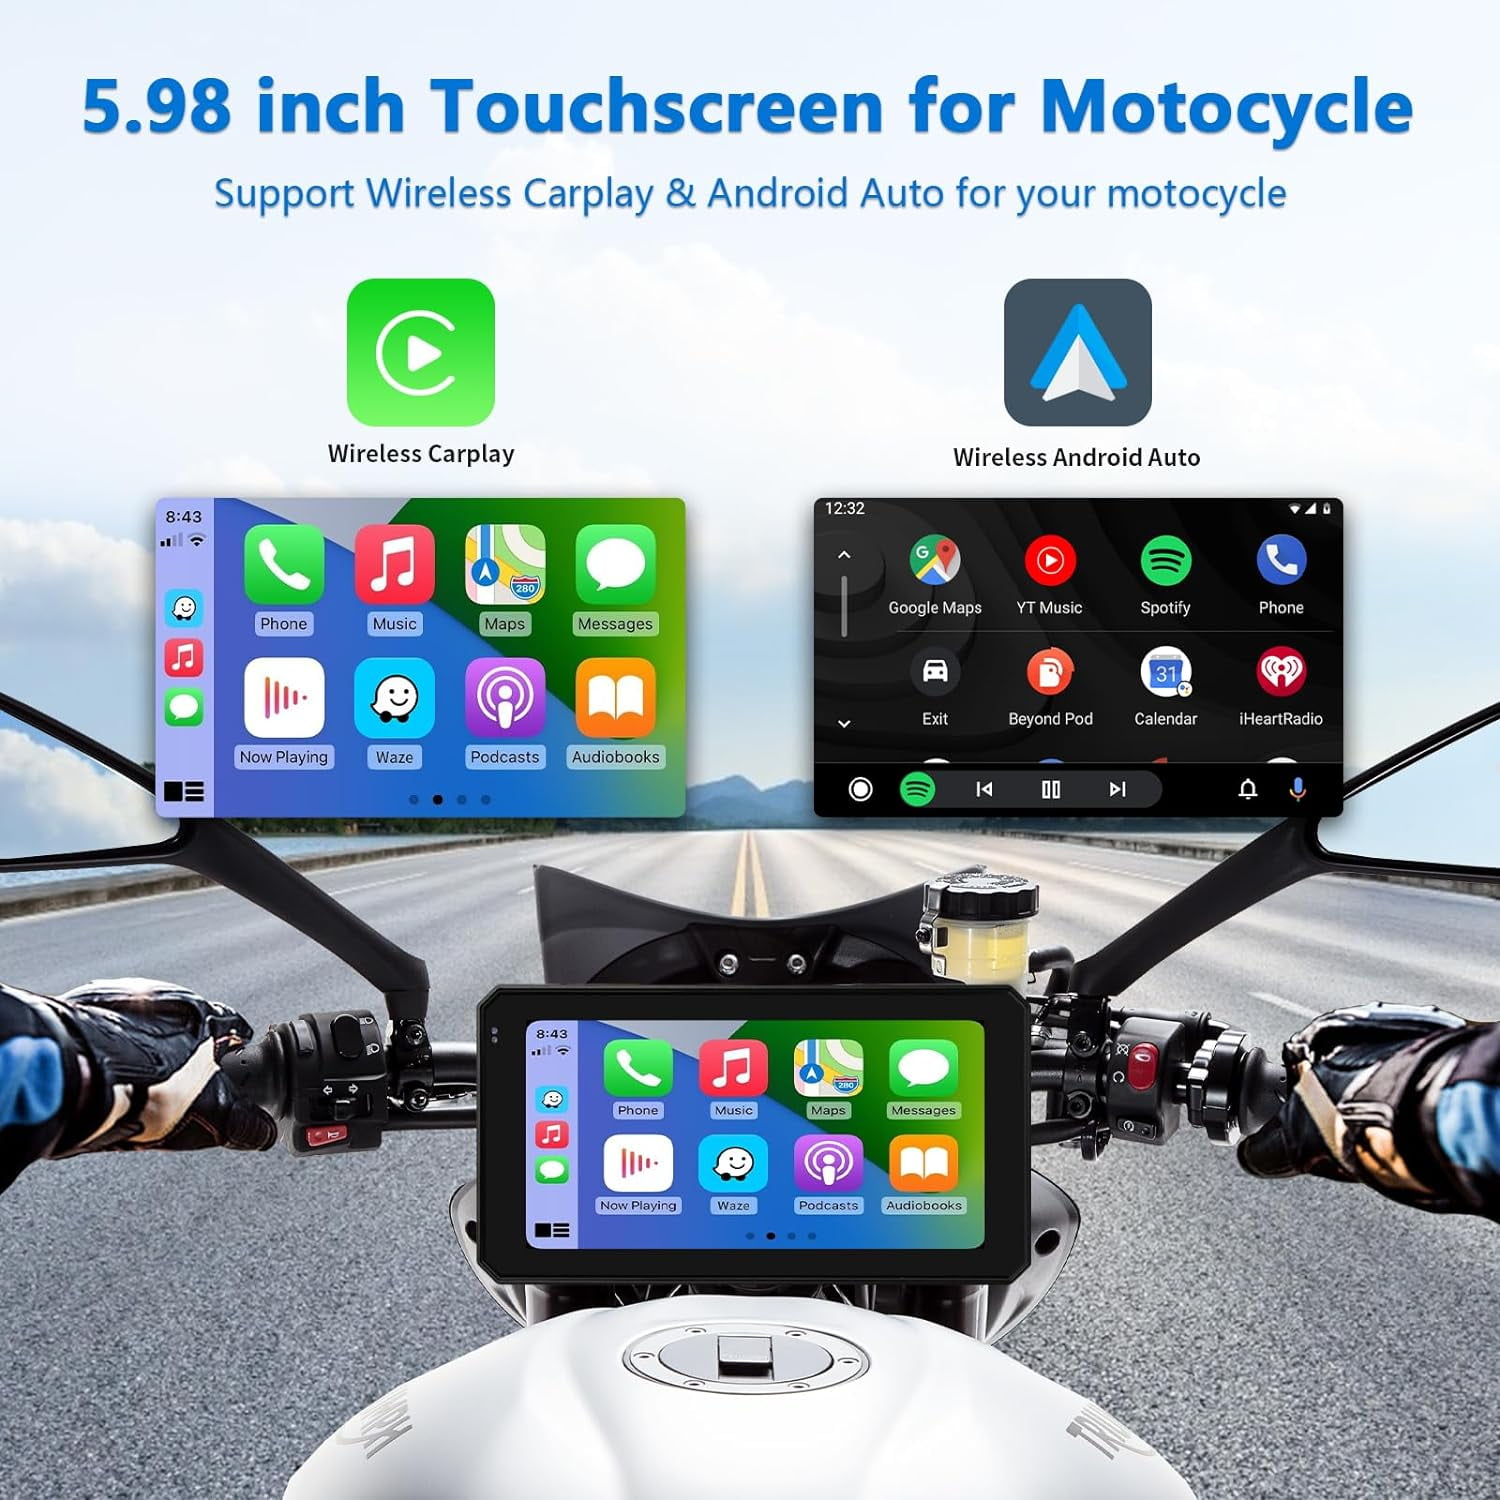 Wireless CarPlay Wireless Android Auto Touchscreen for Motorcycle, Road Top  Waterproof 5.98 Inch Touch Screen Device GPS Navigation for Motorbike,  Stereo Receiver Bluetooth Monitor 